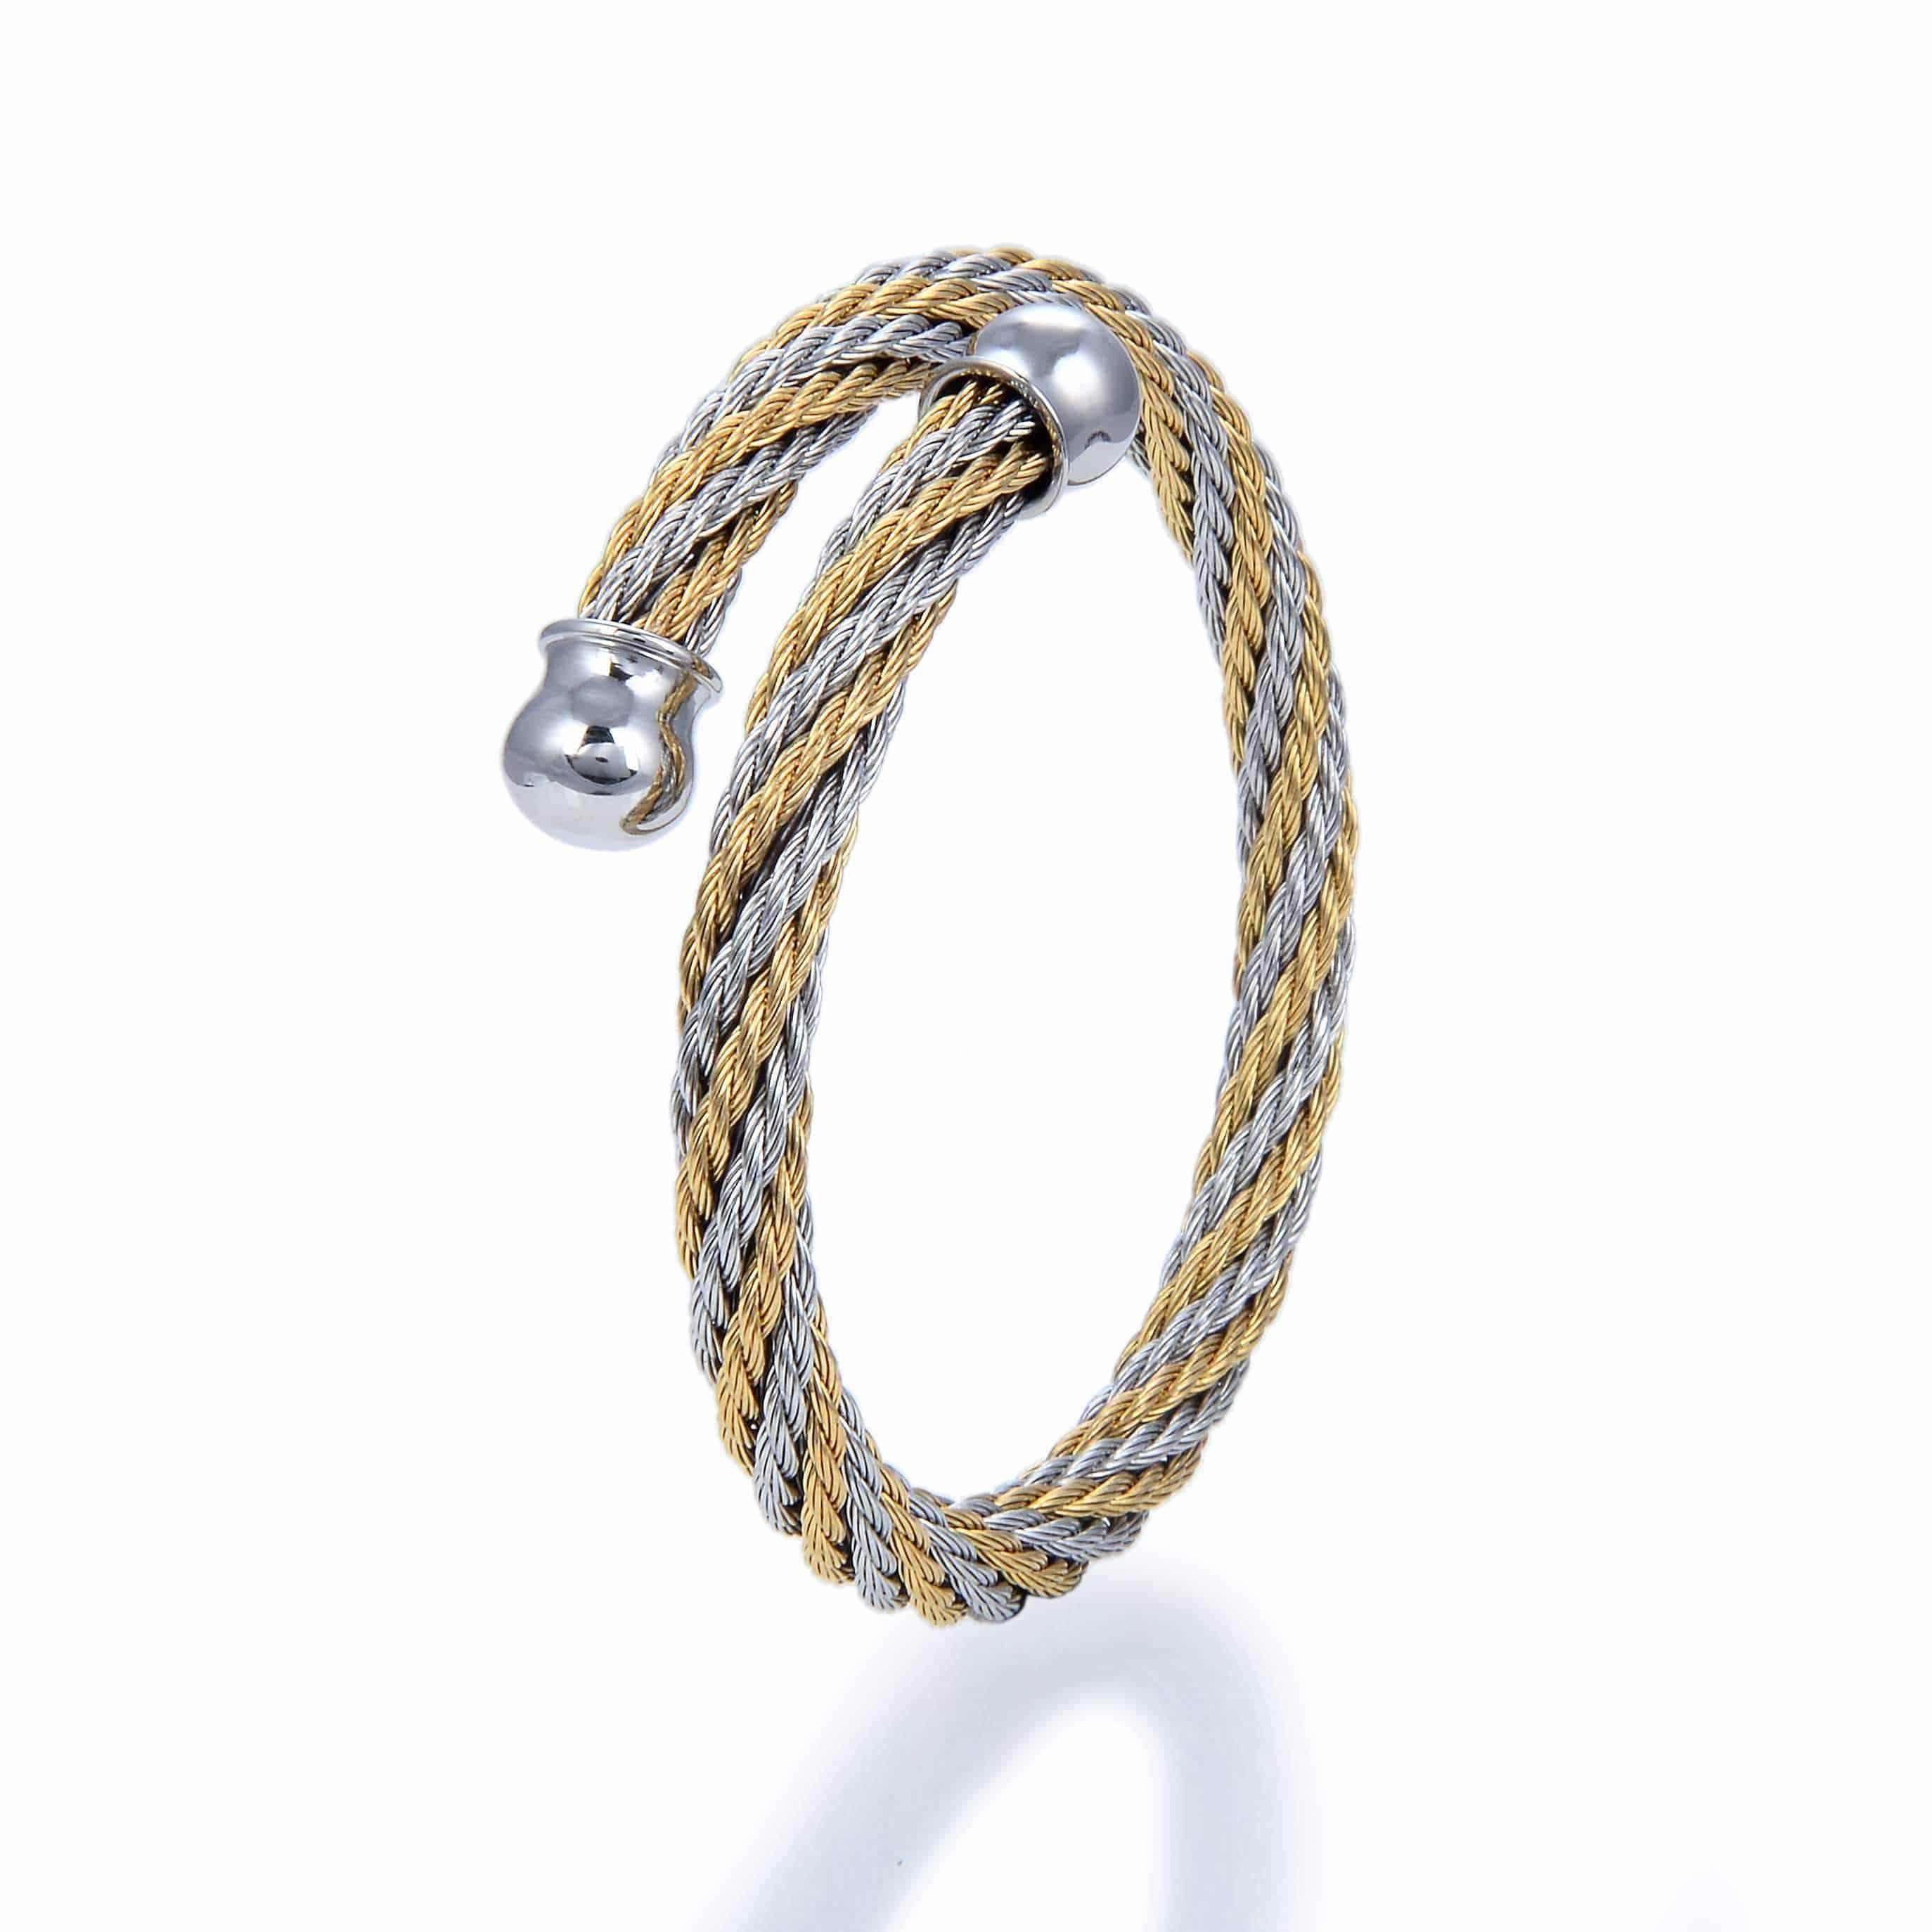 Kalifano Steel Hearts Jewelry Steel Hearts Gold Alternating Rope Chain Round Tip Open Bangle Bracelet SHB200-52